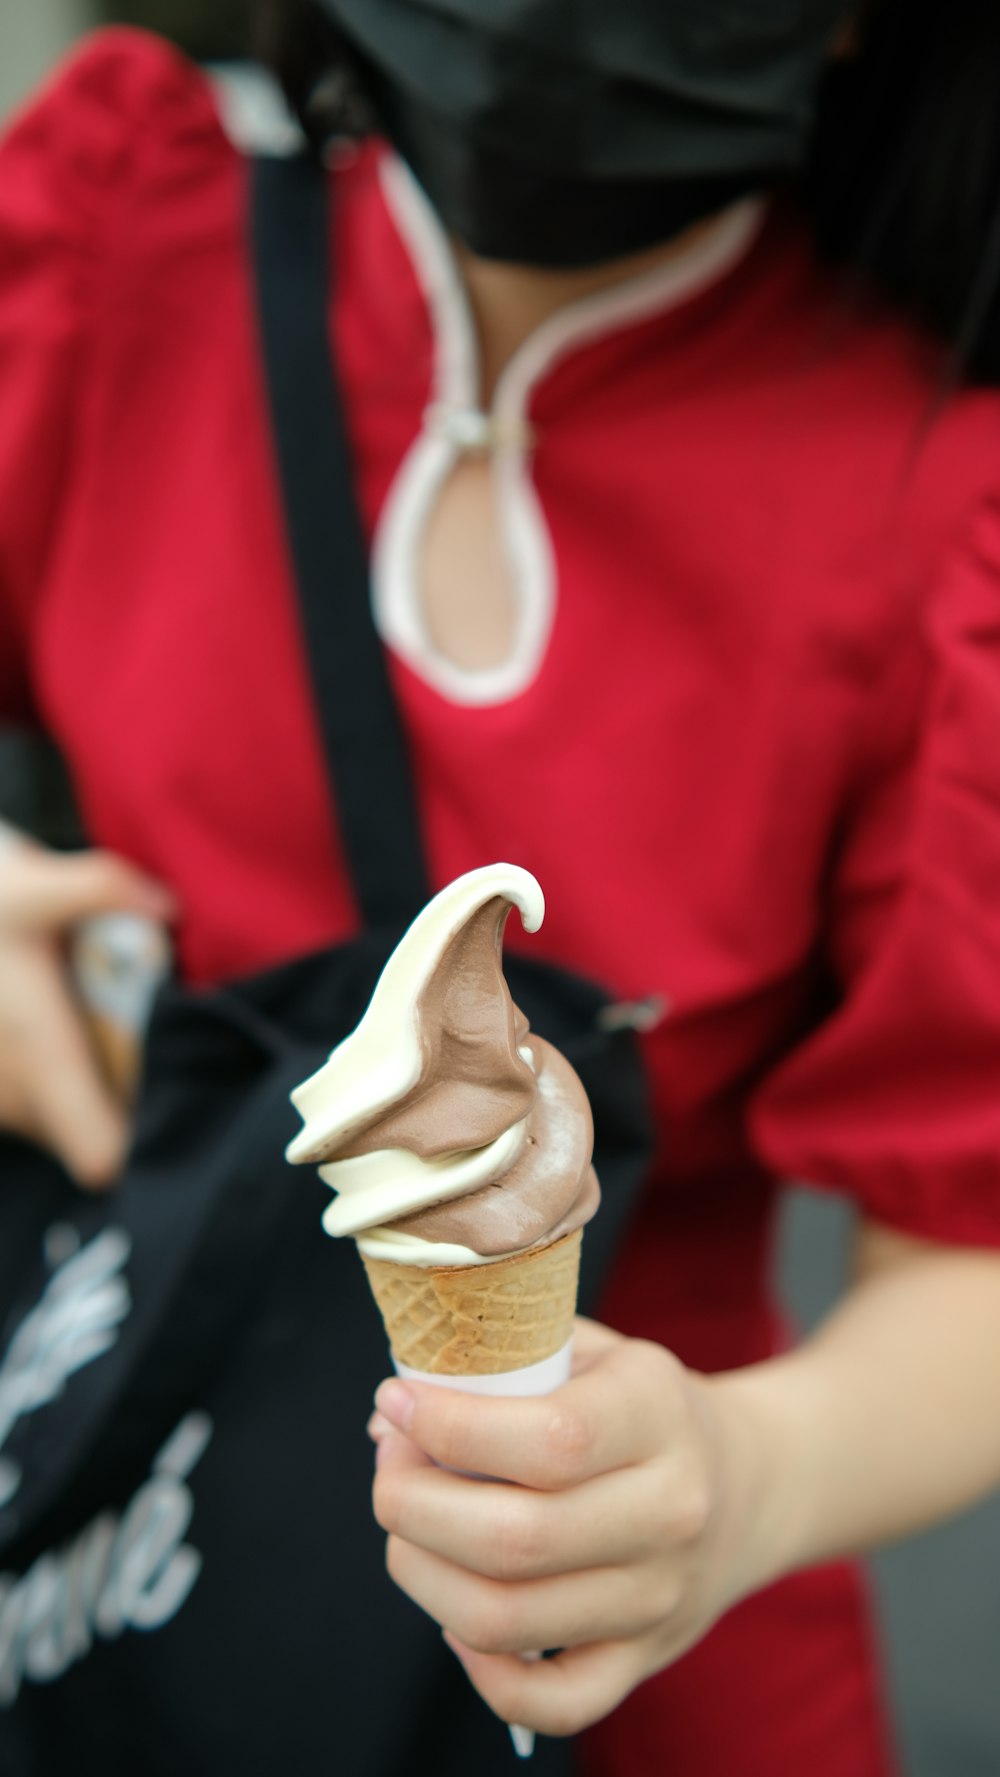 a woman in a red shirt is holding an ice cream cone